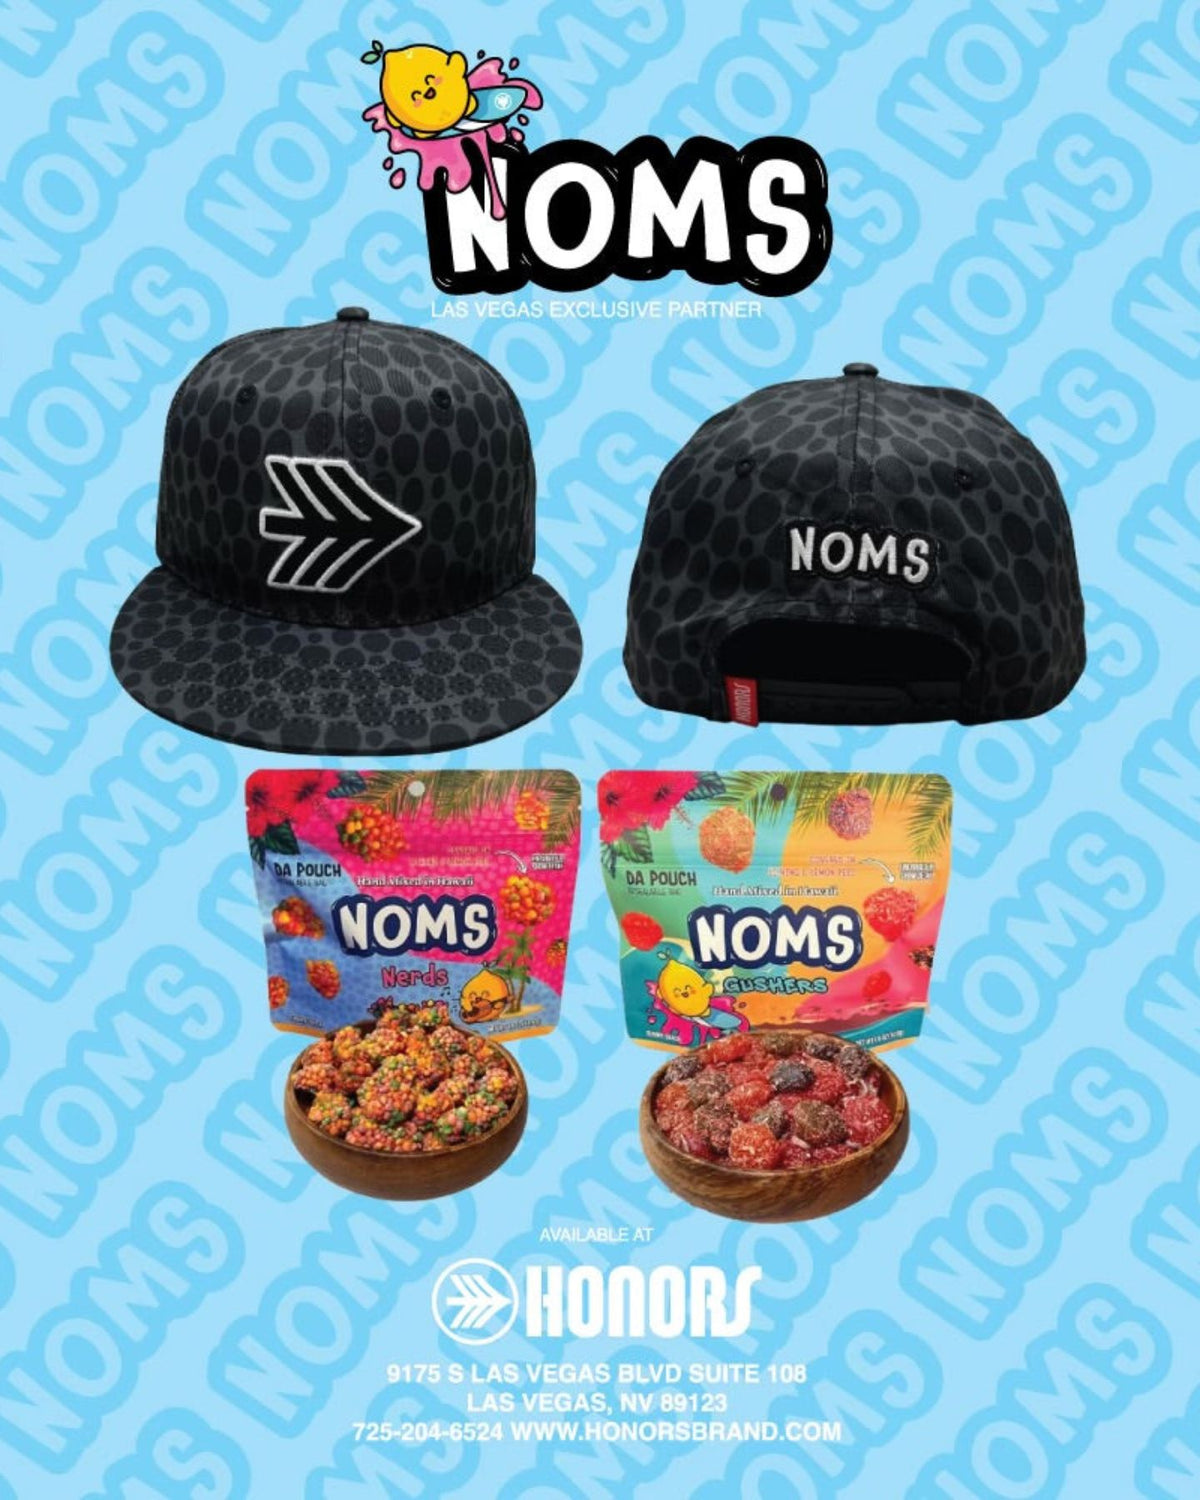 Honors x Noms SnapBack With 2 Pouches